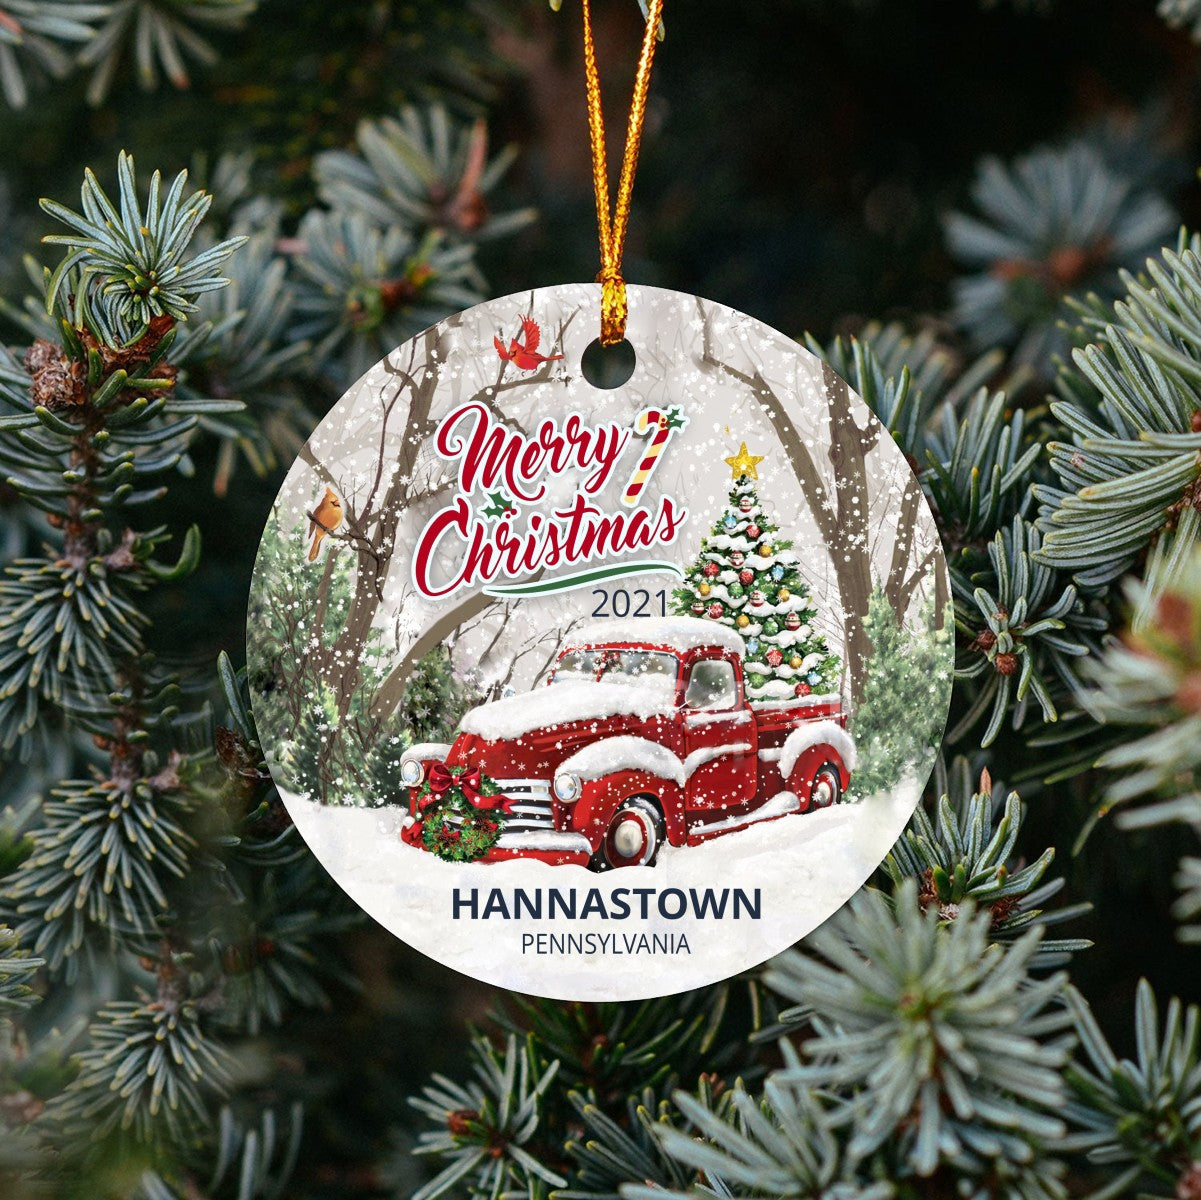 Christmas Tree Ornaments Hannastown - Ornament With Name City, State Hannastown Pennsylvania PA Ornament - Red Truck Xmas Ornaments 3'' Plastic Gift For Family, Friend And Housewarming